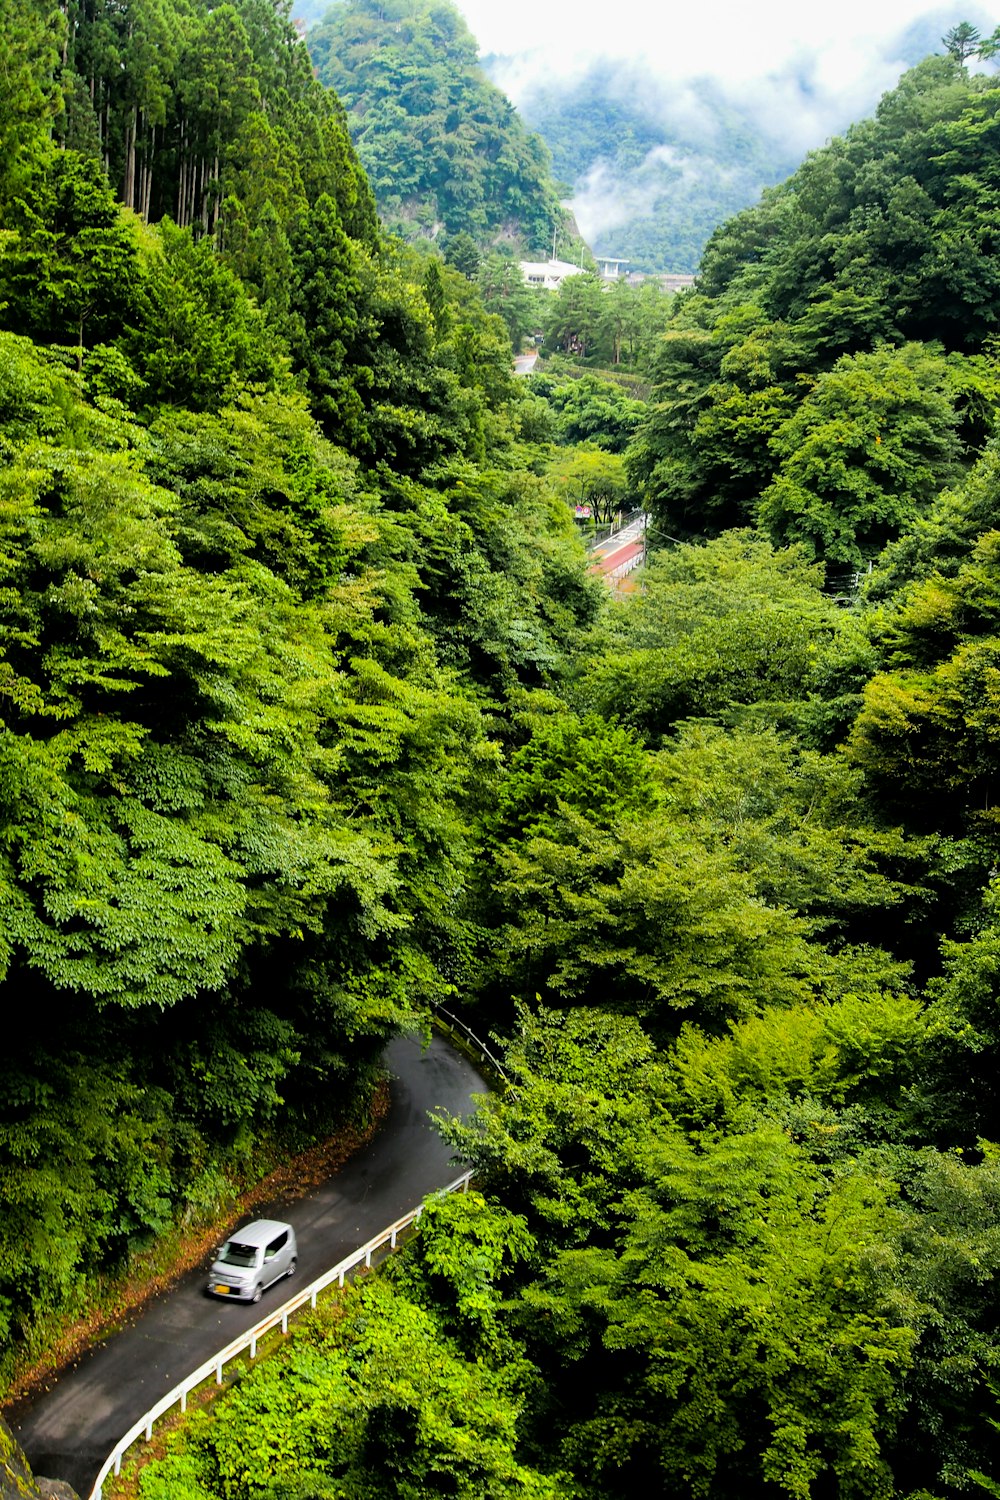 a car driving down a road surrounded by lush green trees